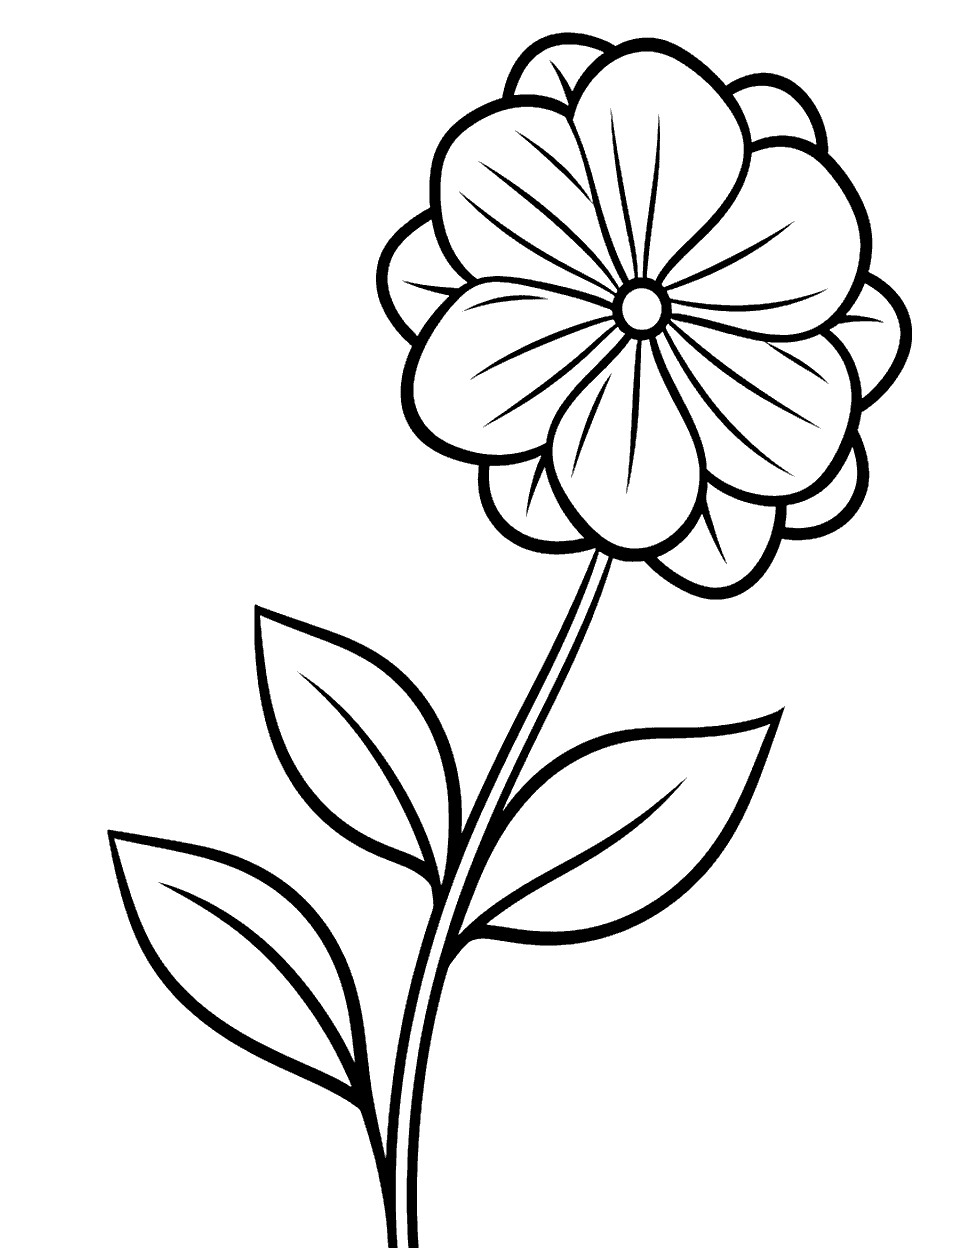 Blooming Flower Coloring Page - A single flower in full bloom.